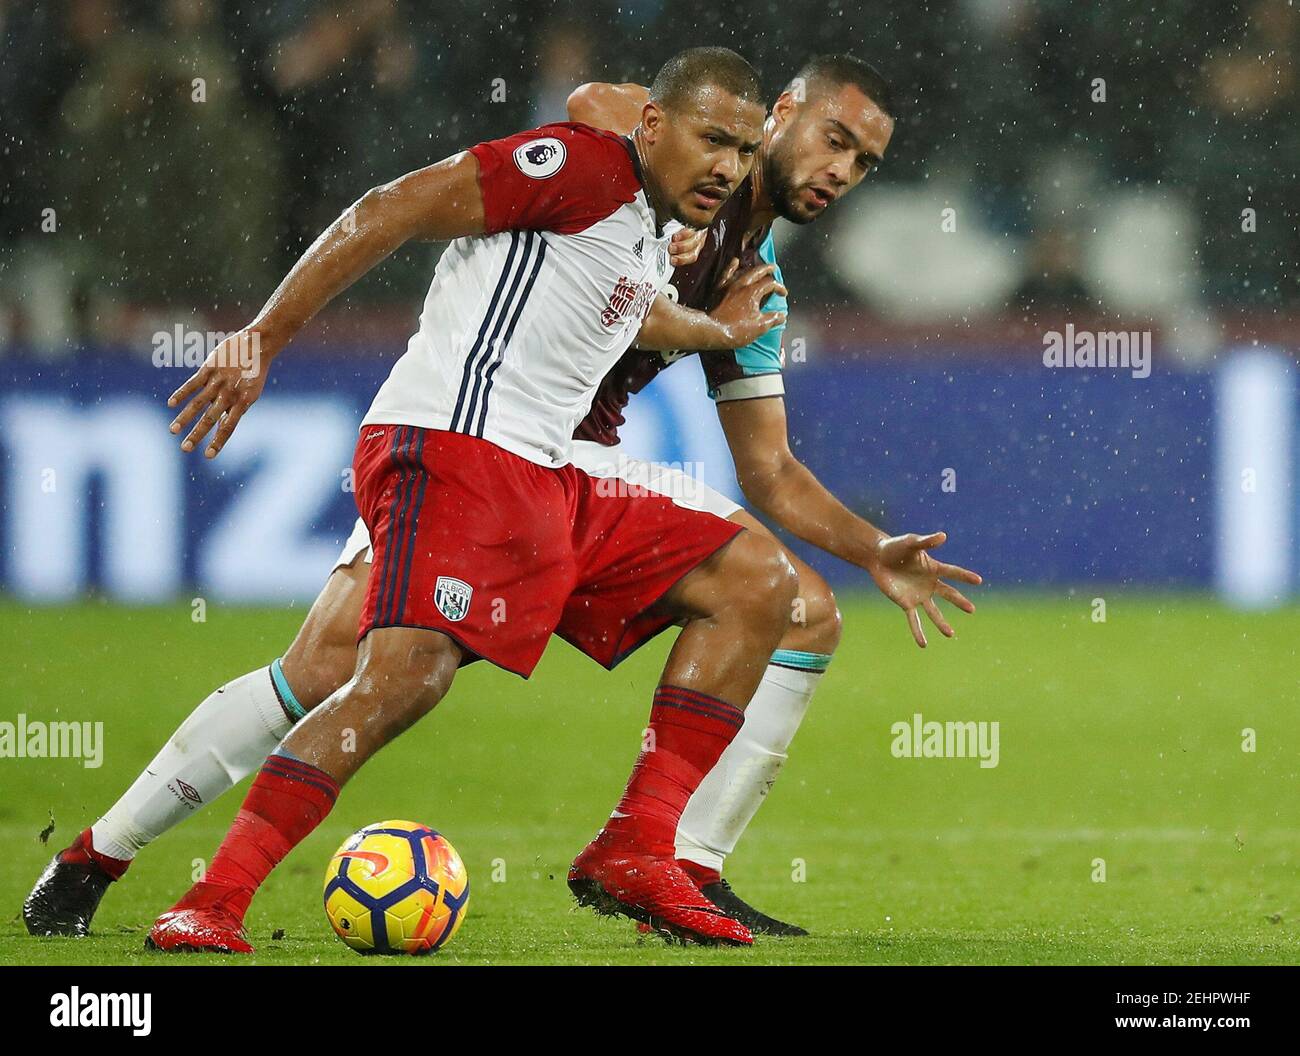 Soccer Football - Premier League - West Ham United vs West Bromwich Albion - London Stadium, London, Britain - January 2, 2018   West Bromwich Albion's Salomon Rondon in action with West Ham United's Winston Reid    REUTERS/Eddie Keogh    EDITORIAL USE ONLY. No use with unauthorized audio, video, data, fixture lists, club/league logos or 'live' services. Online in-match use limited to 75 images, no video emulation. No use in betting, games or single club/league/player publications.  Please contact your account representative for further details. Stock Photo